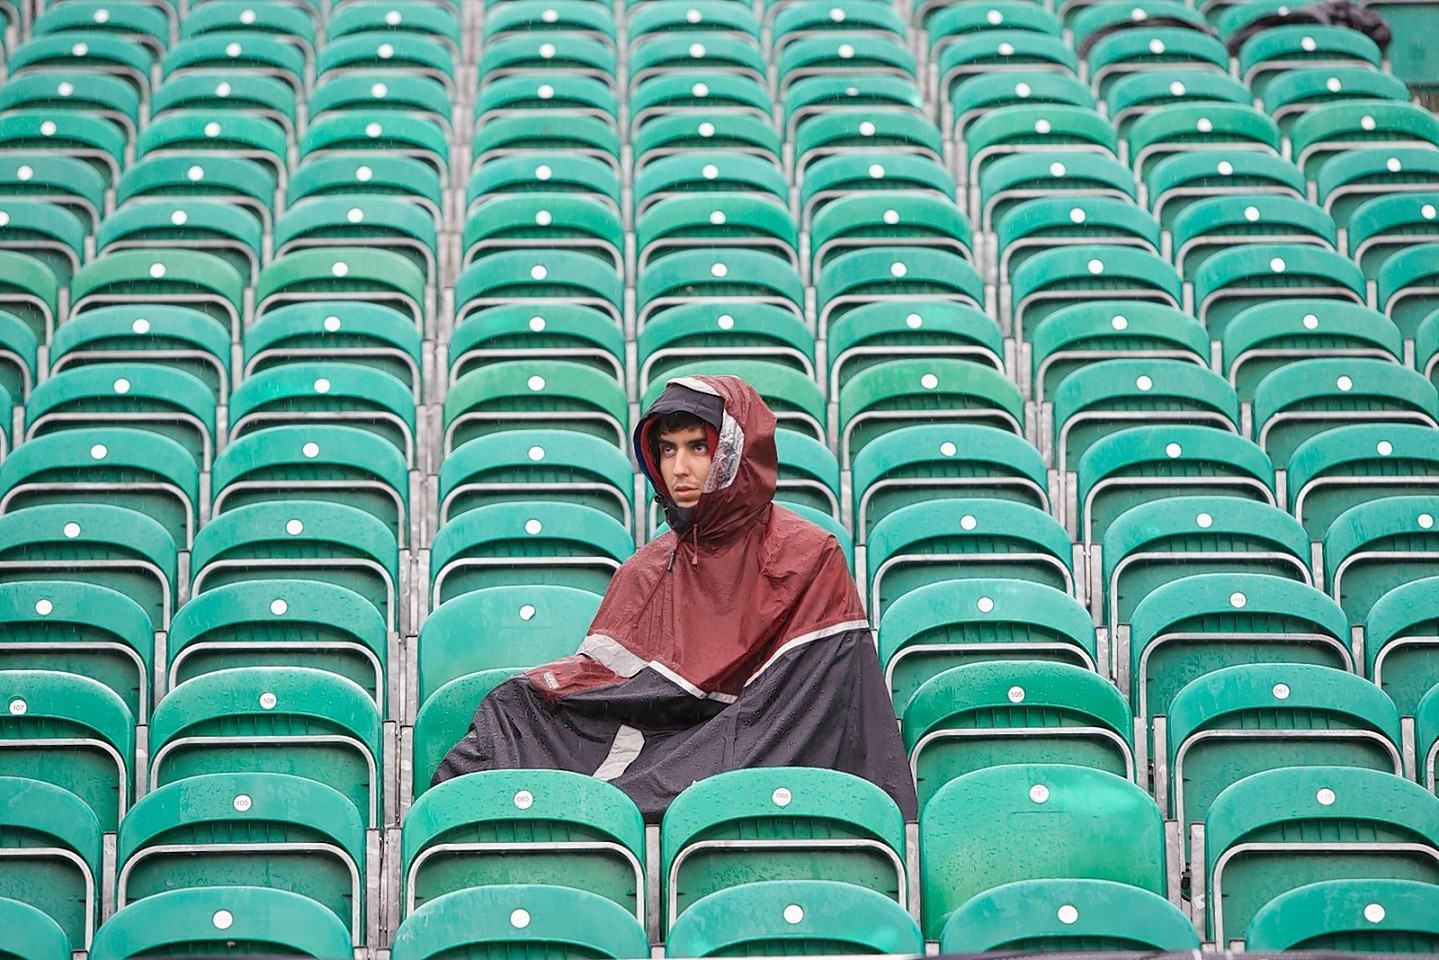 A usually packed stand is home to a damp fan during another downpour at Fort William.